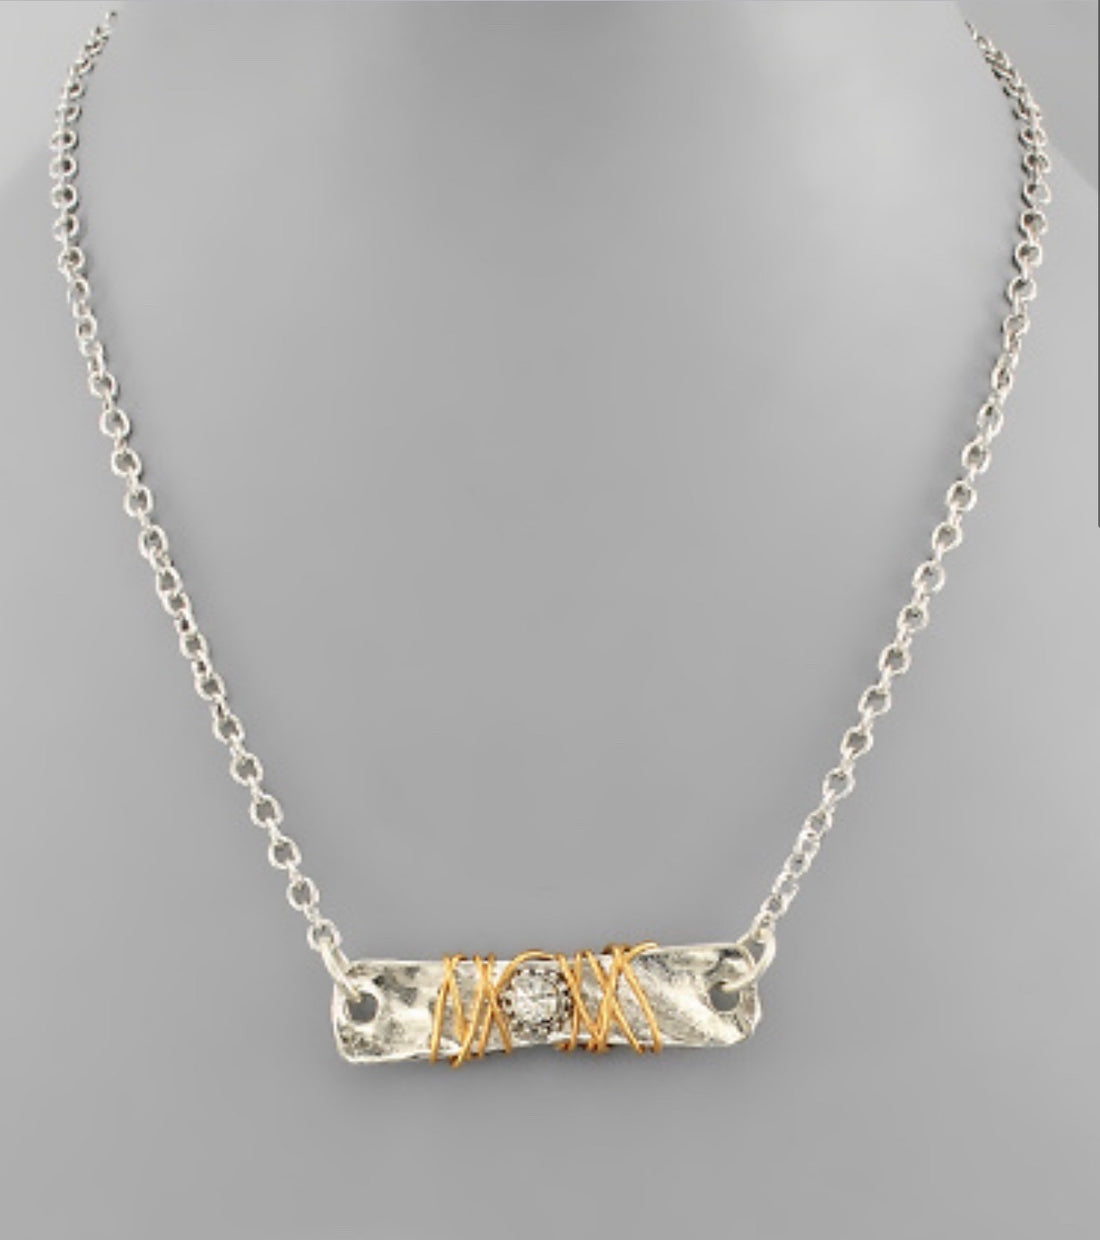 Silver Bar Necklace with Crystal